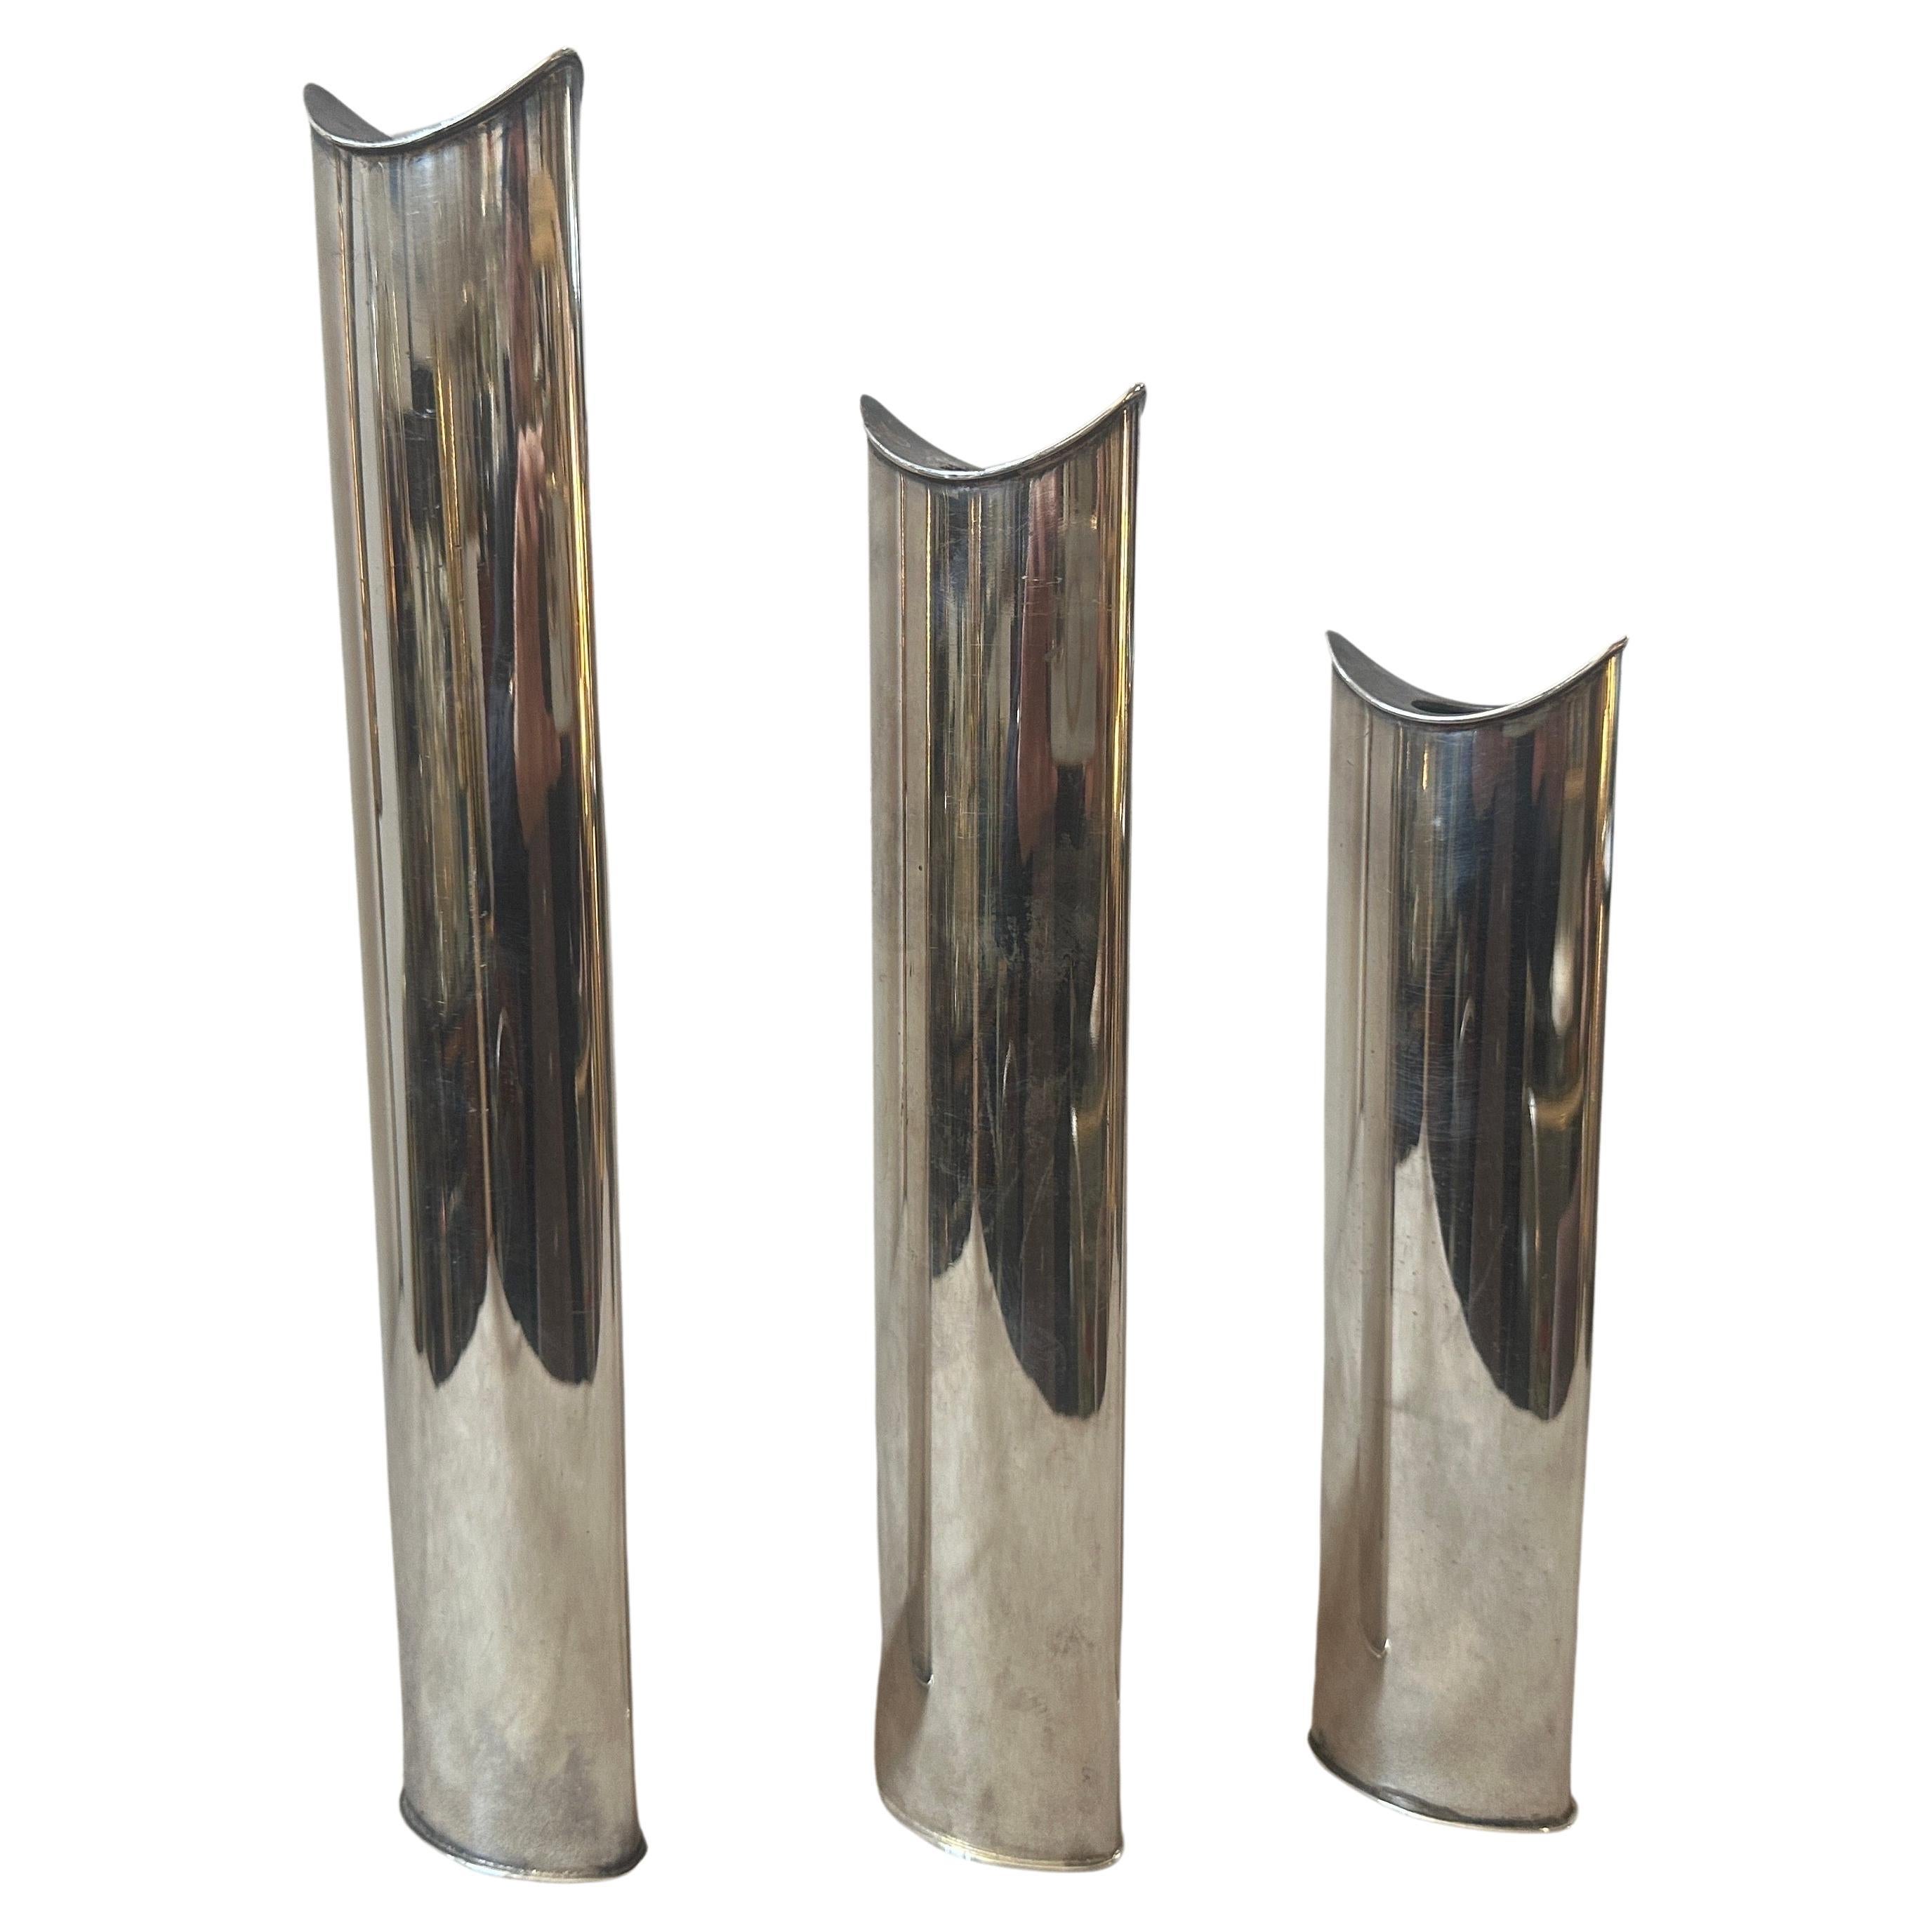 Three iconic silver plated Giselle Vases also usable as candlesticks designed by Lino Sabattini and produced by Sabattini Argenteria. Heights of the other two vases are cm 26 and cm 21. They are in perfect conditions. Lino Sabattini is an Italian